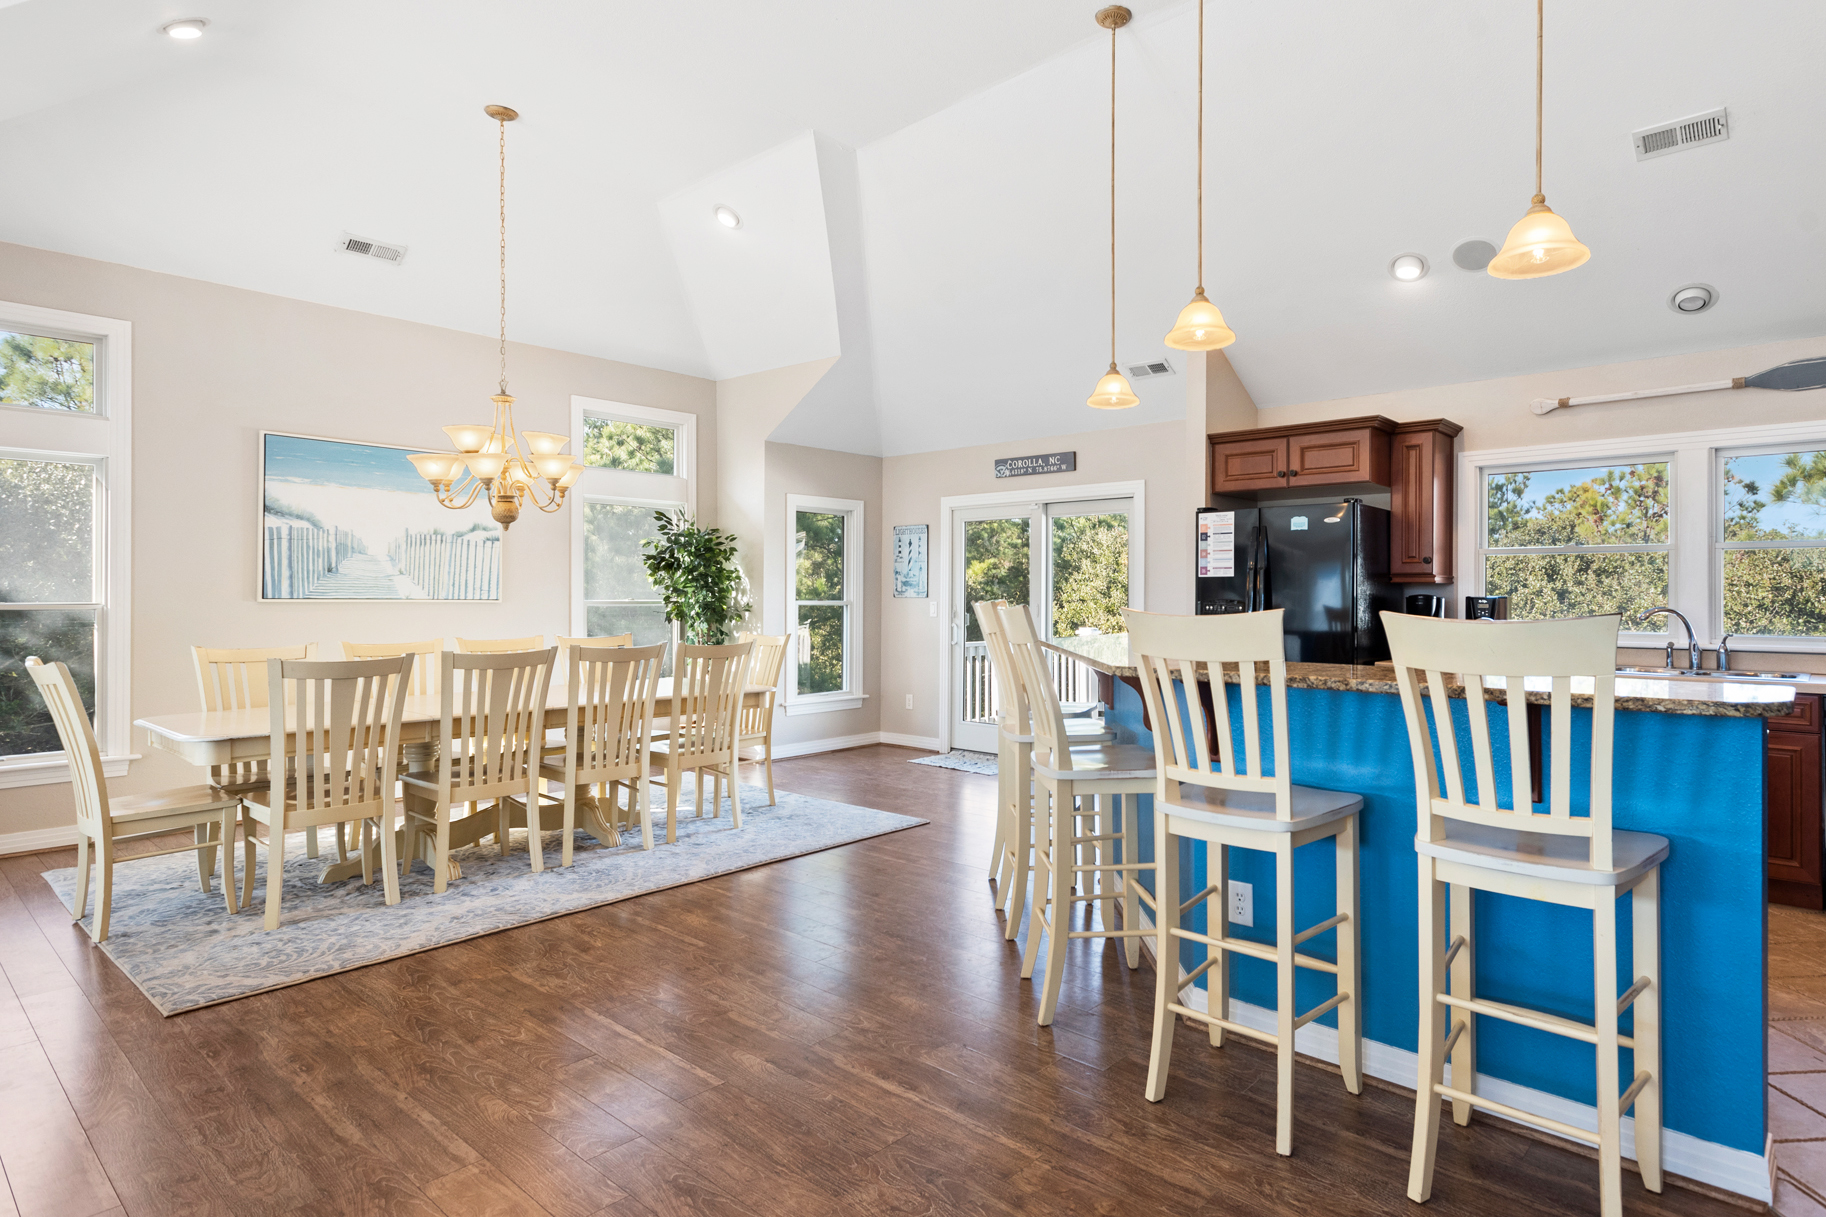 CC372: Sidebar | Top Level Dining Area and Kitchen